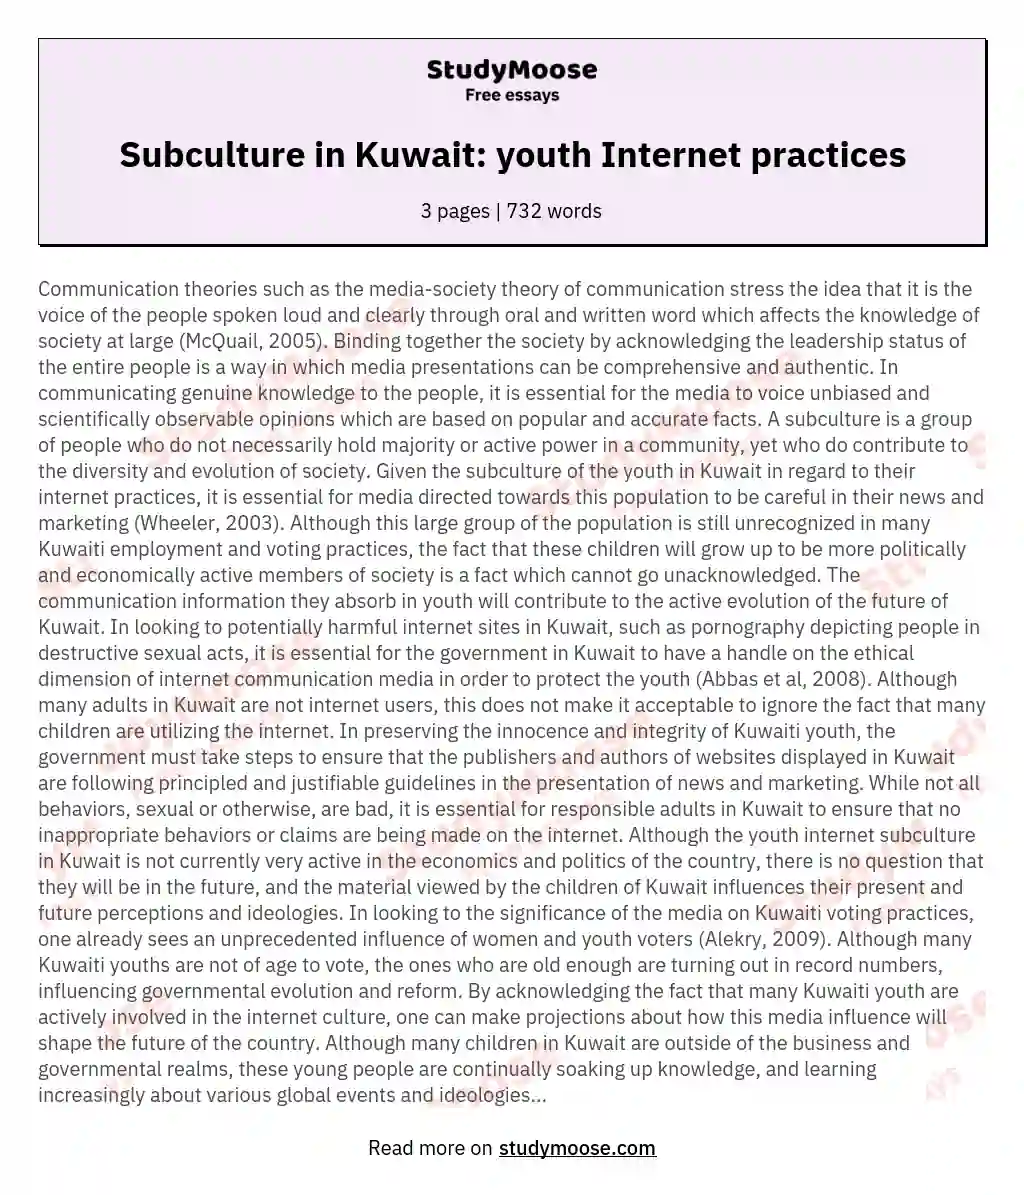 Subculture in Kuwait: youth Internet practices essay